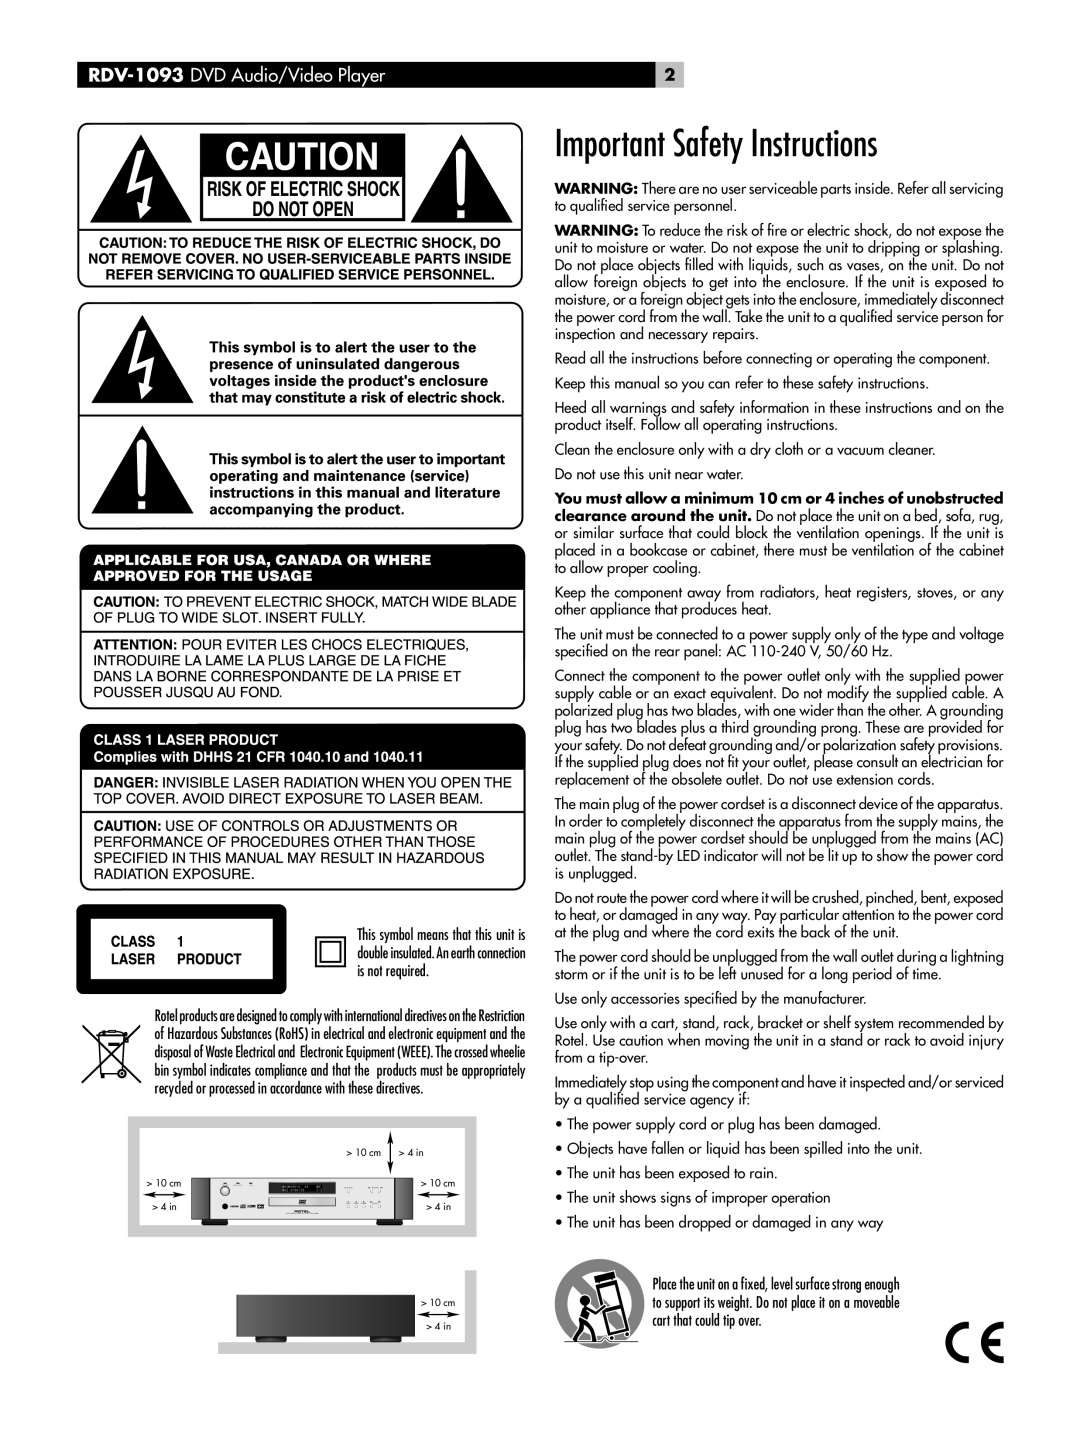 Rotel owner manual Important Safety Instructions, RDV-1093 DVD Audio/Video Player 